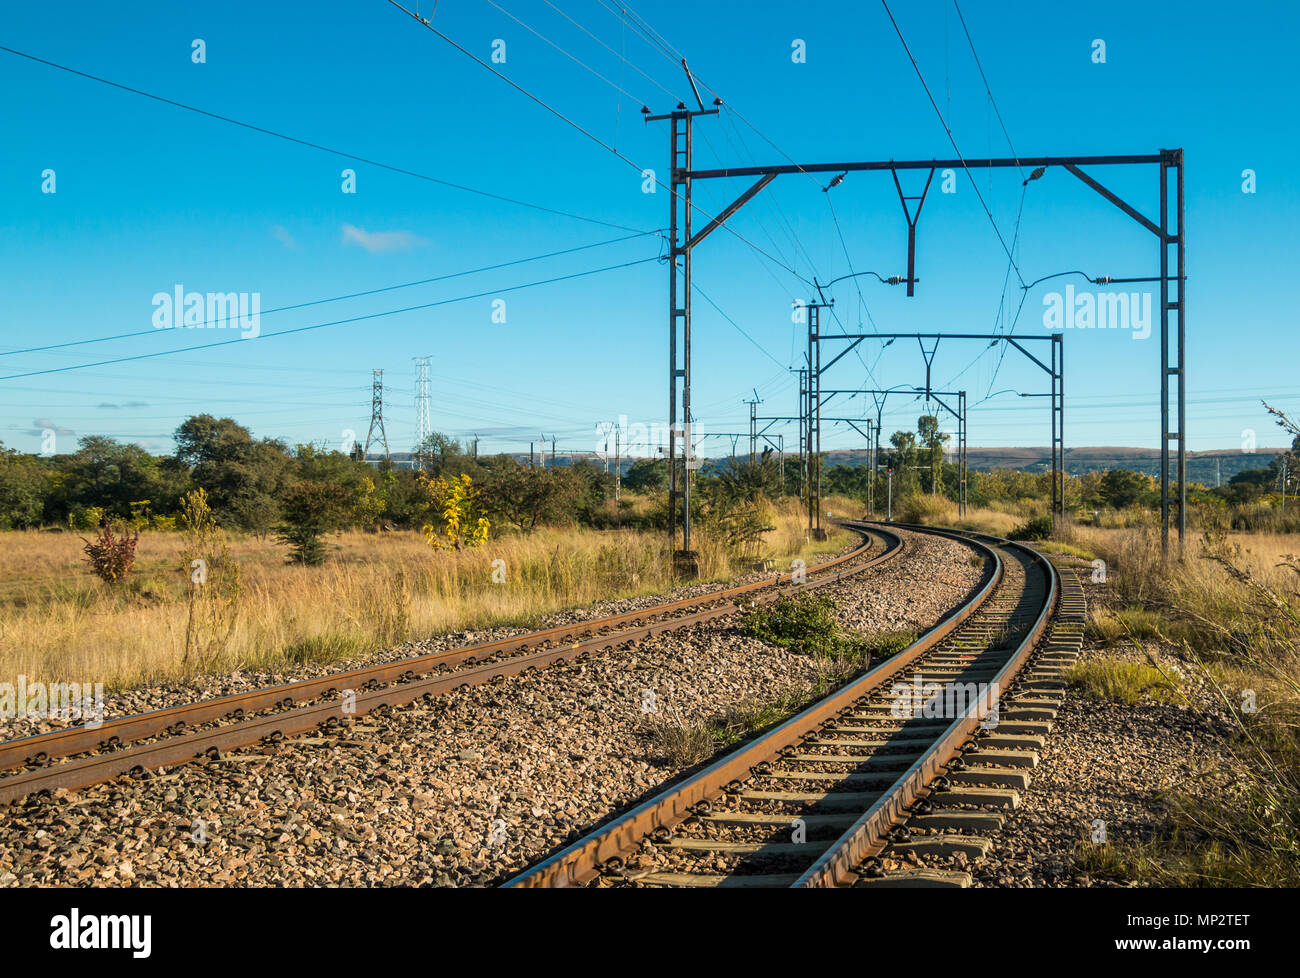 Electric railway lines going through a rural landscape Stock Photo